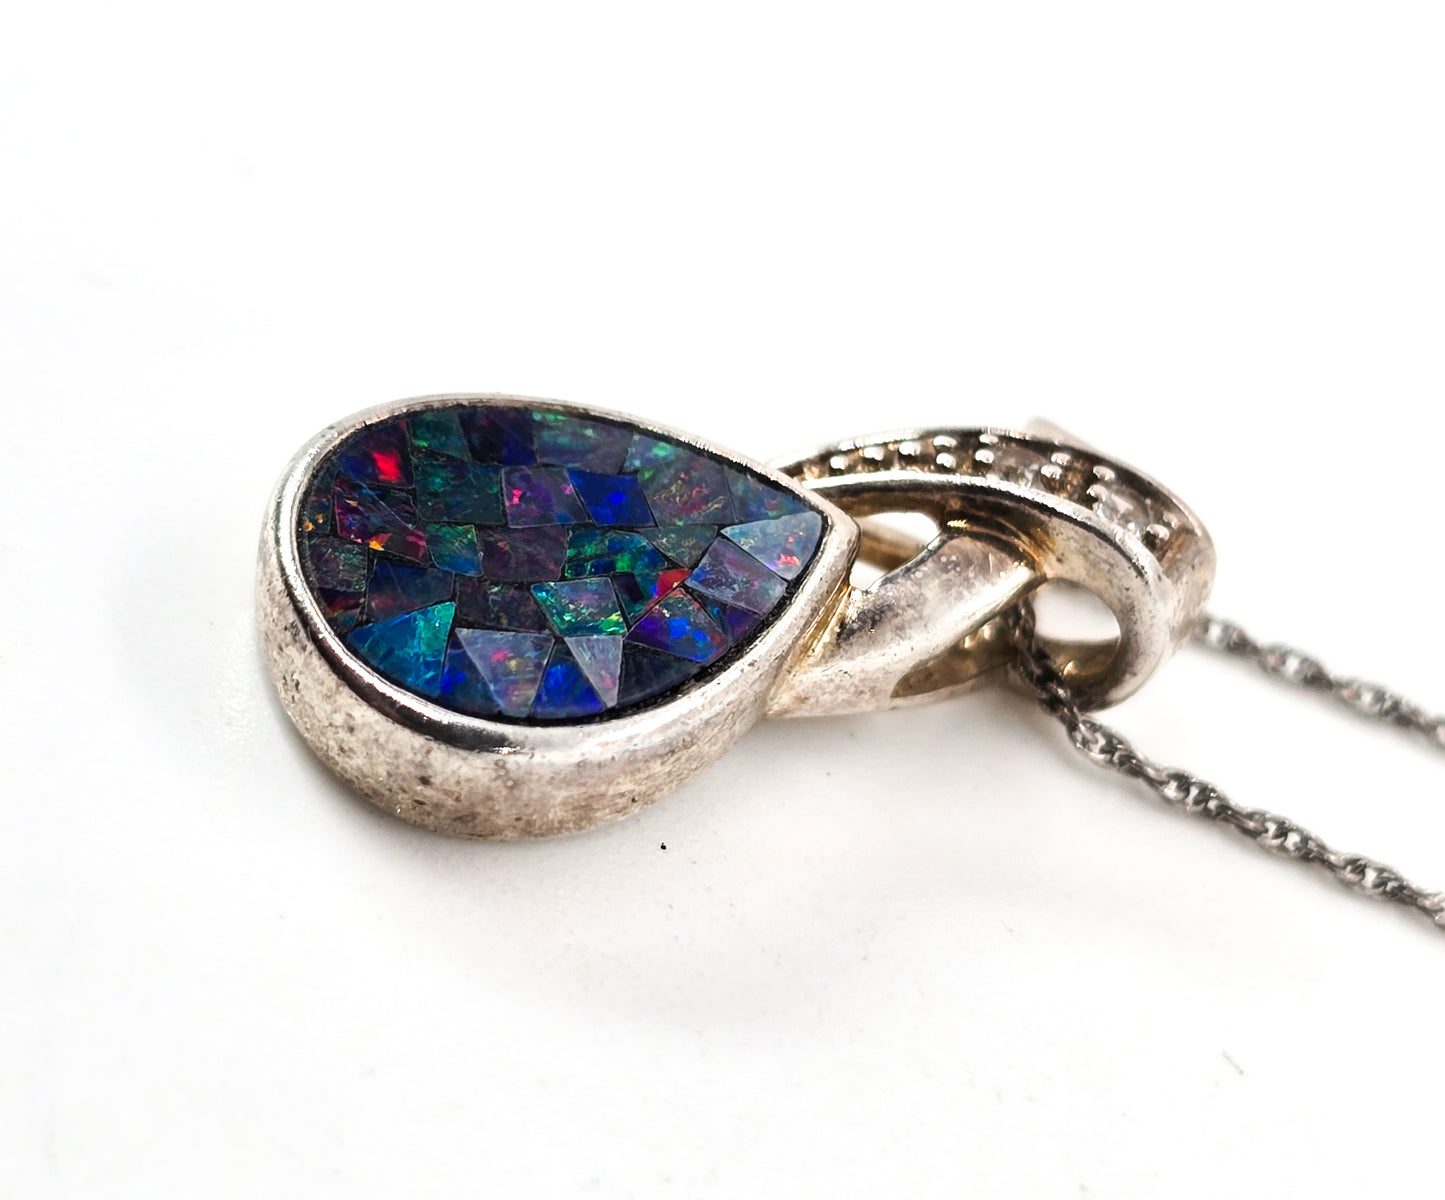 Australian opal abstract mosaic sterling silver cubic Zircon pendant necklace